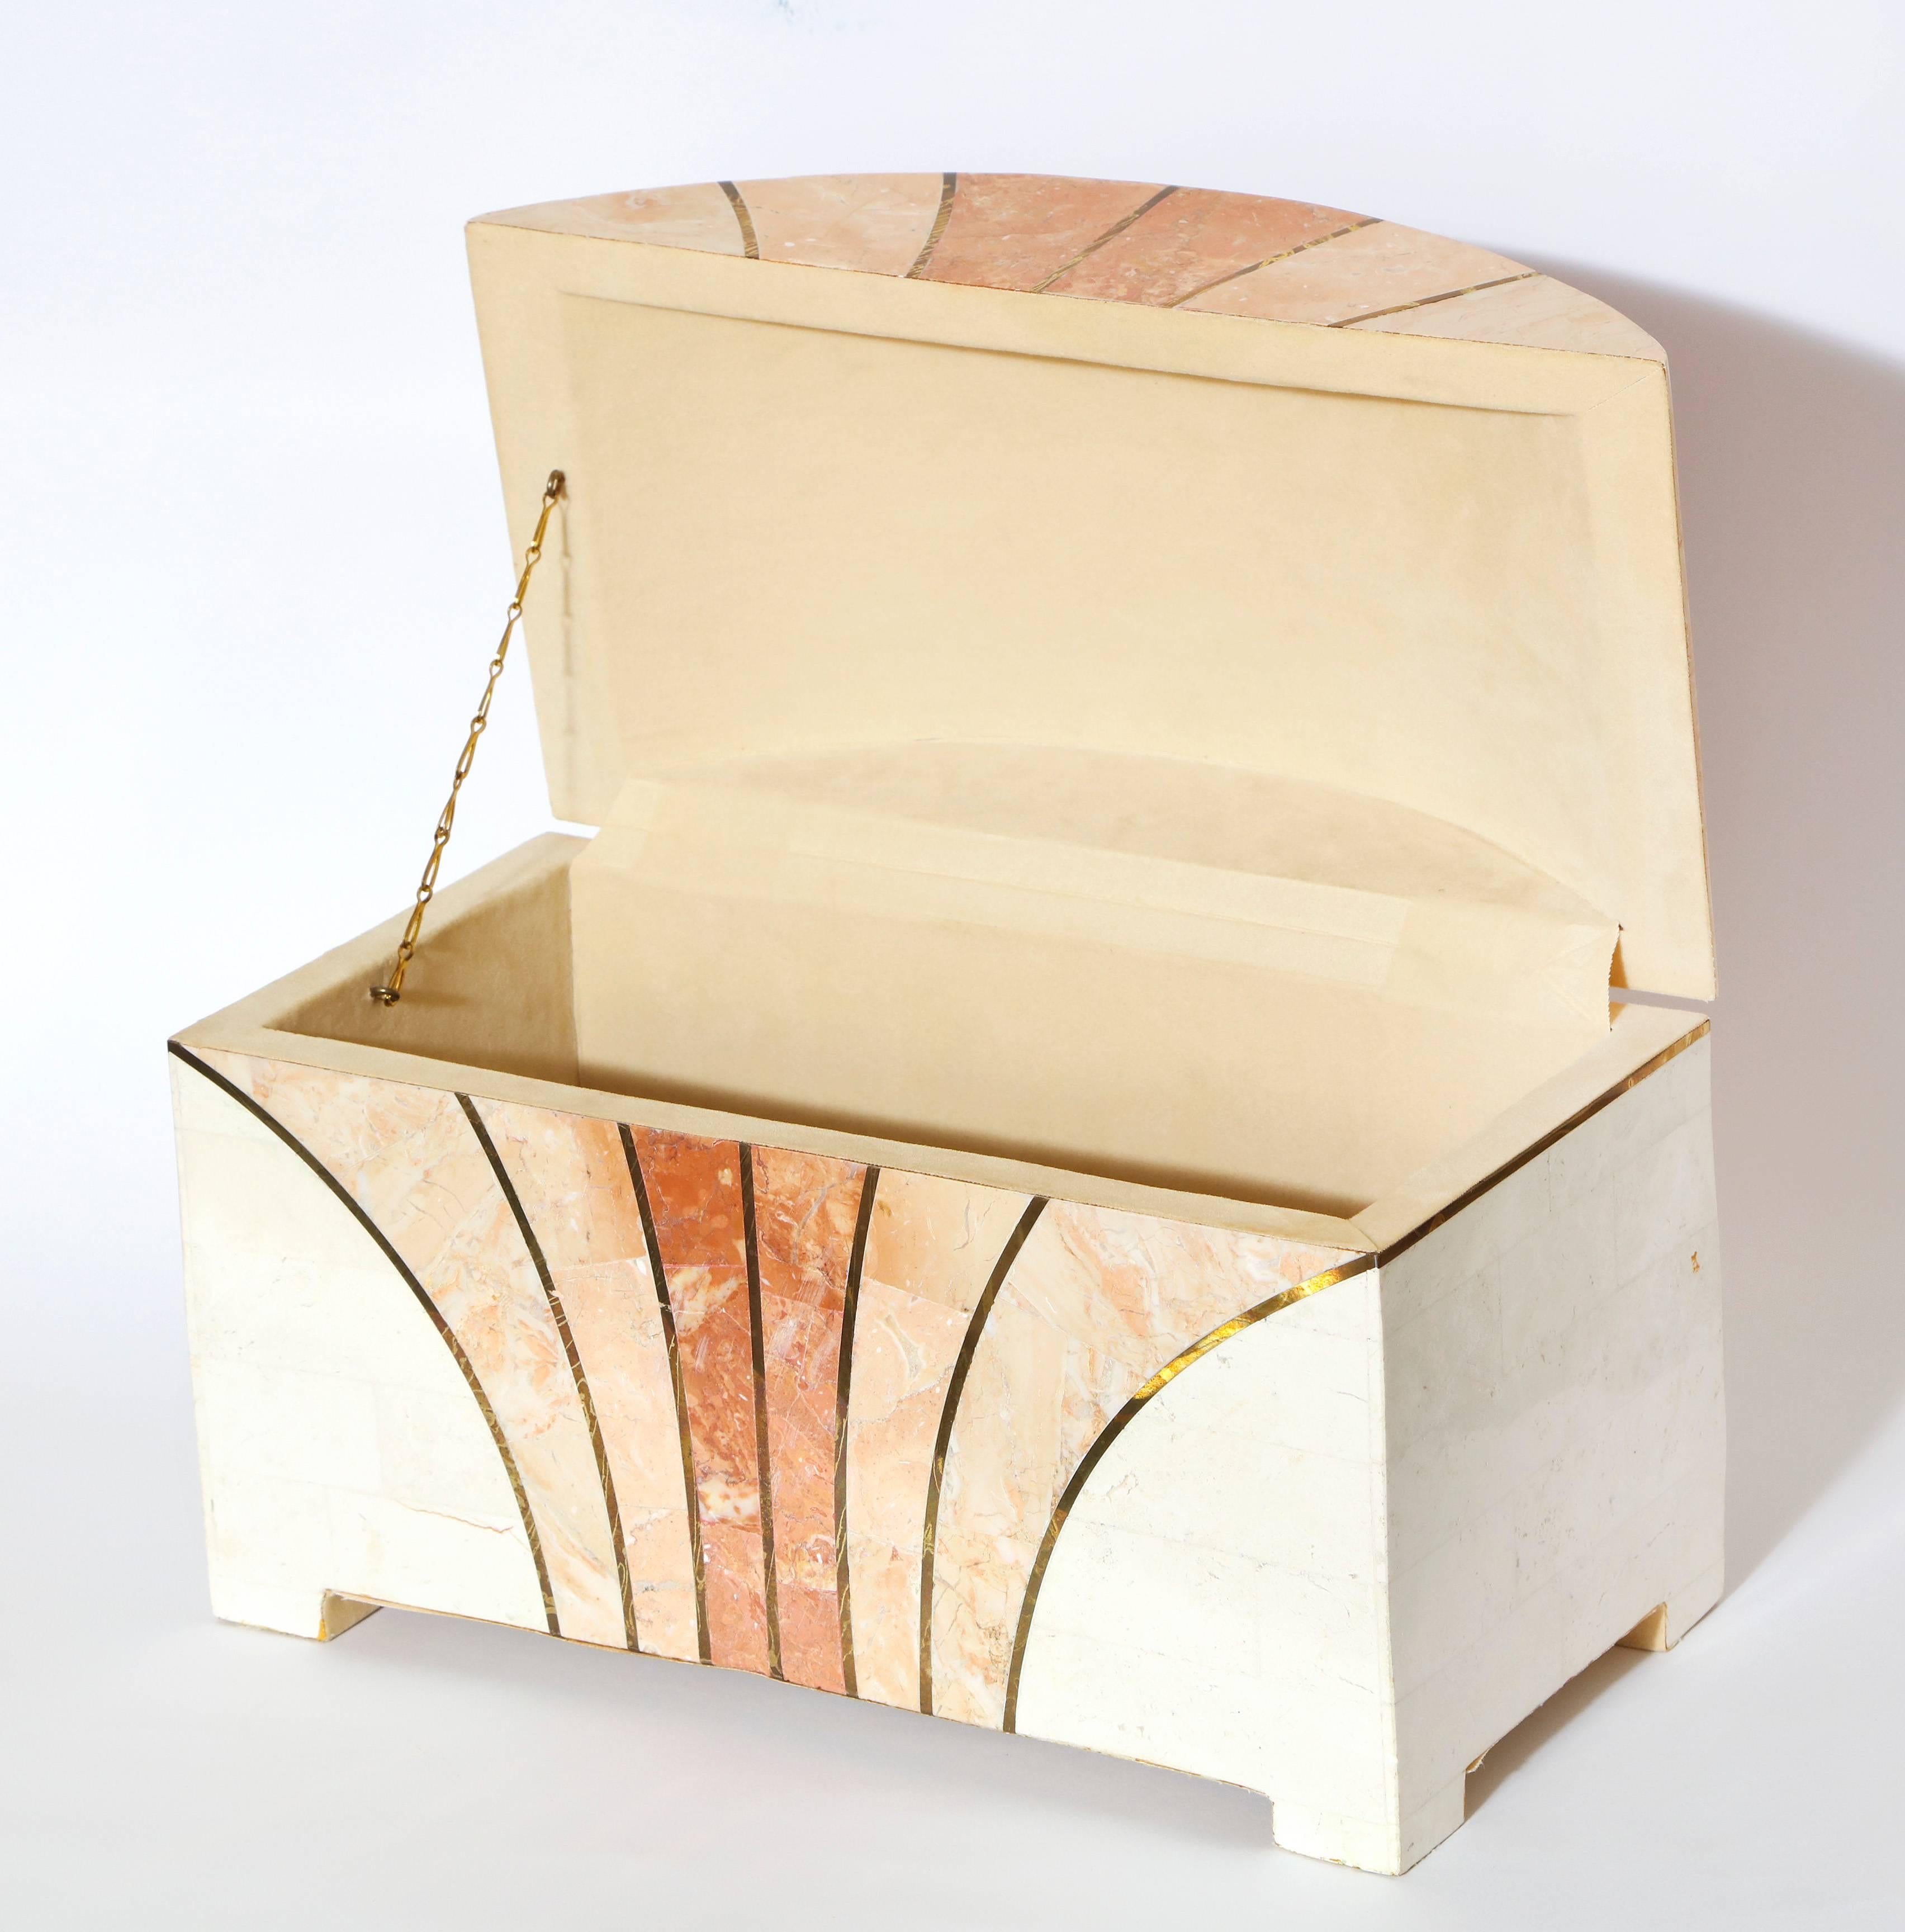 A Maitland-Smith vintage 1970s arch shaped tessellated stone box with decorative brass inlay; the stone in beautiful shades of rich corals and cream. The interior lined in cream velvet with brass chain link support. In excellent condition.